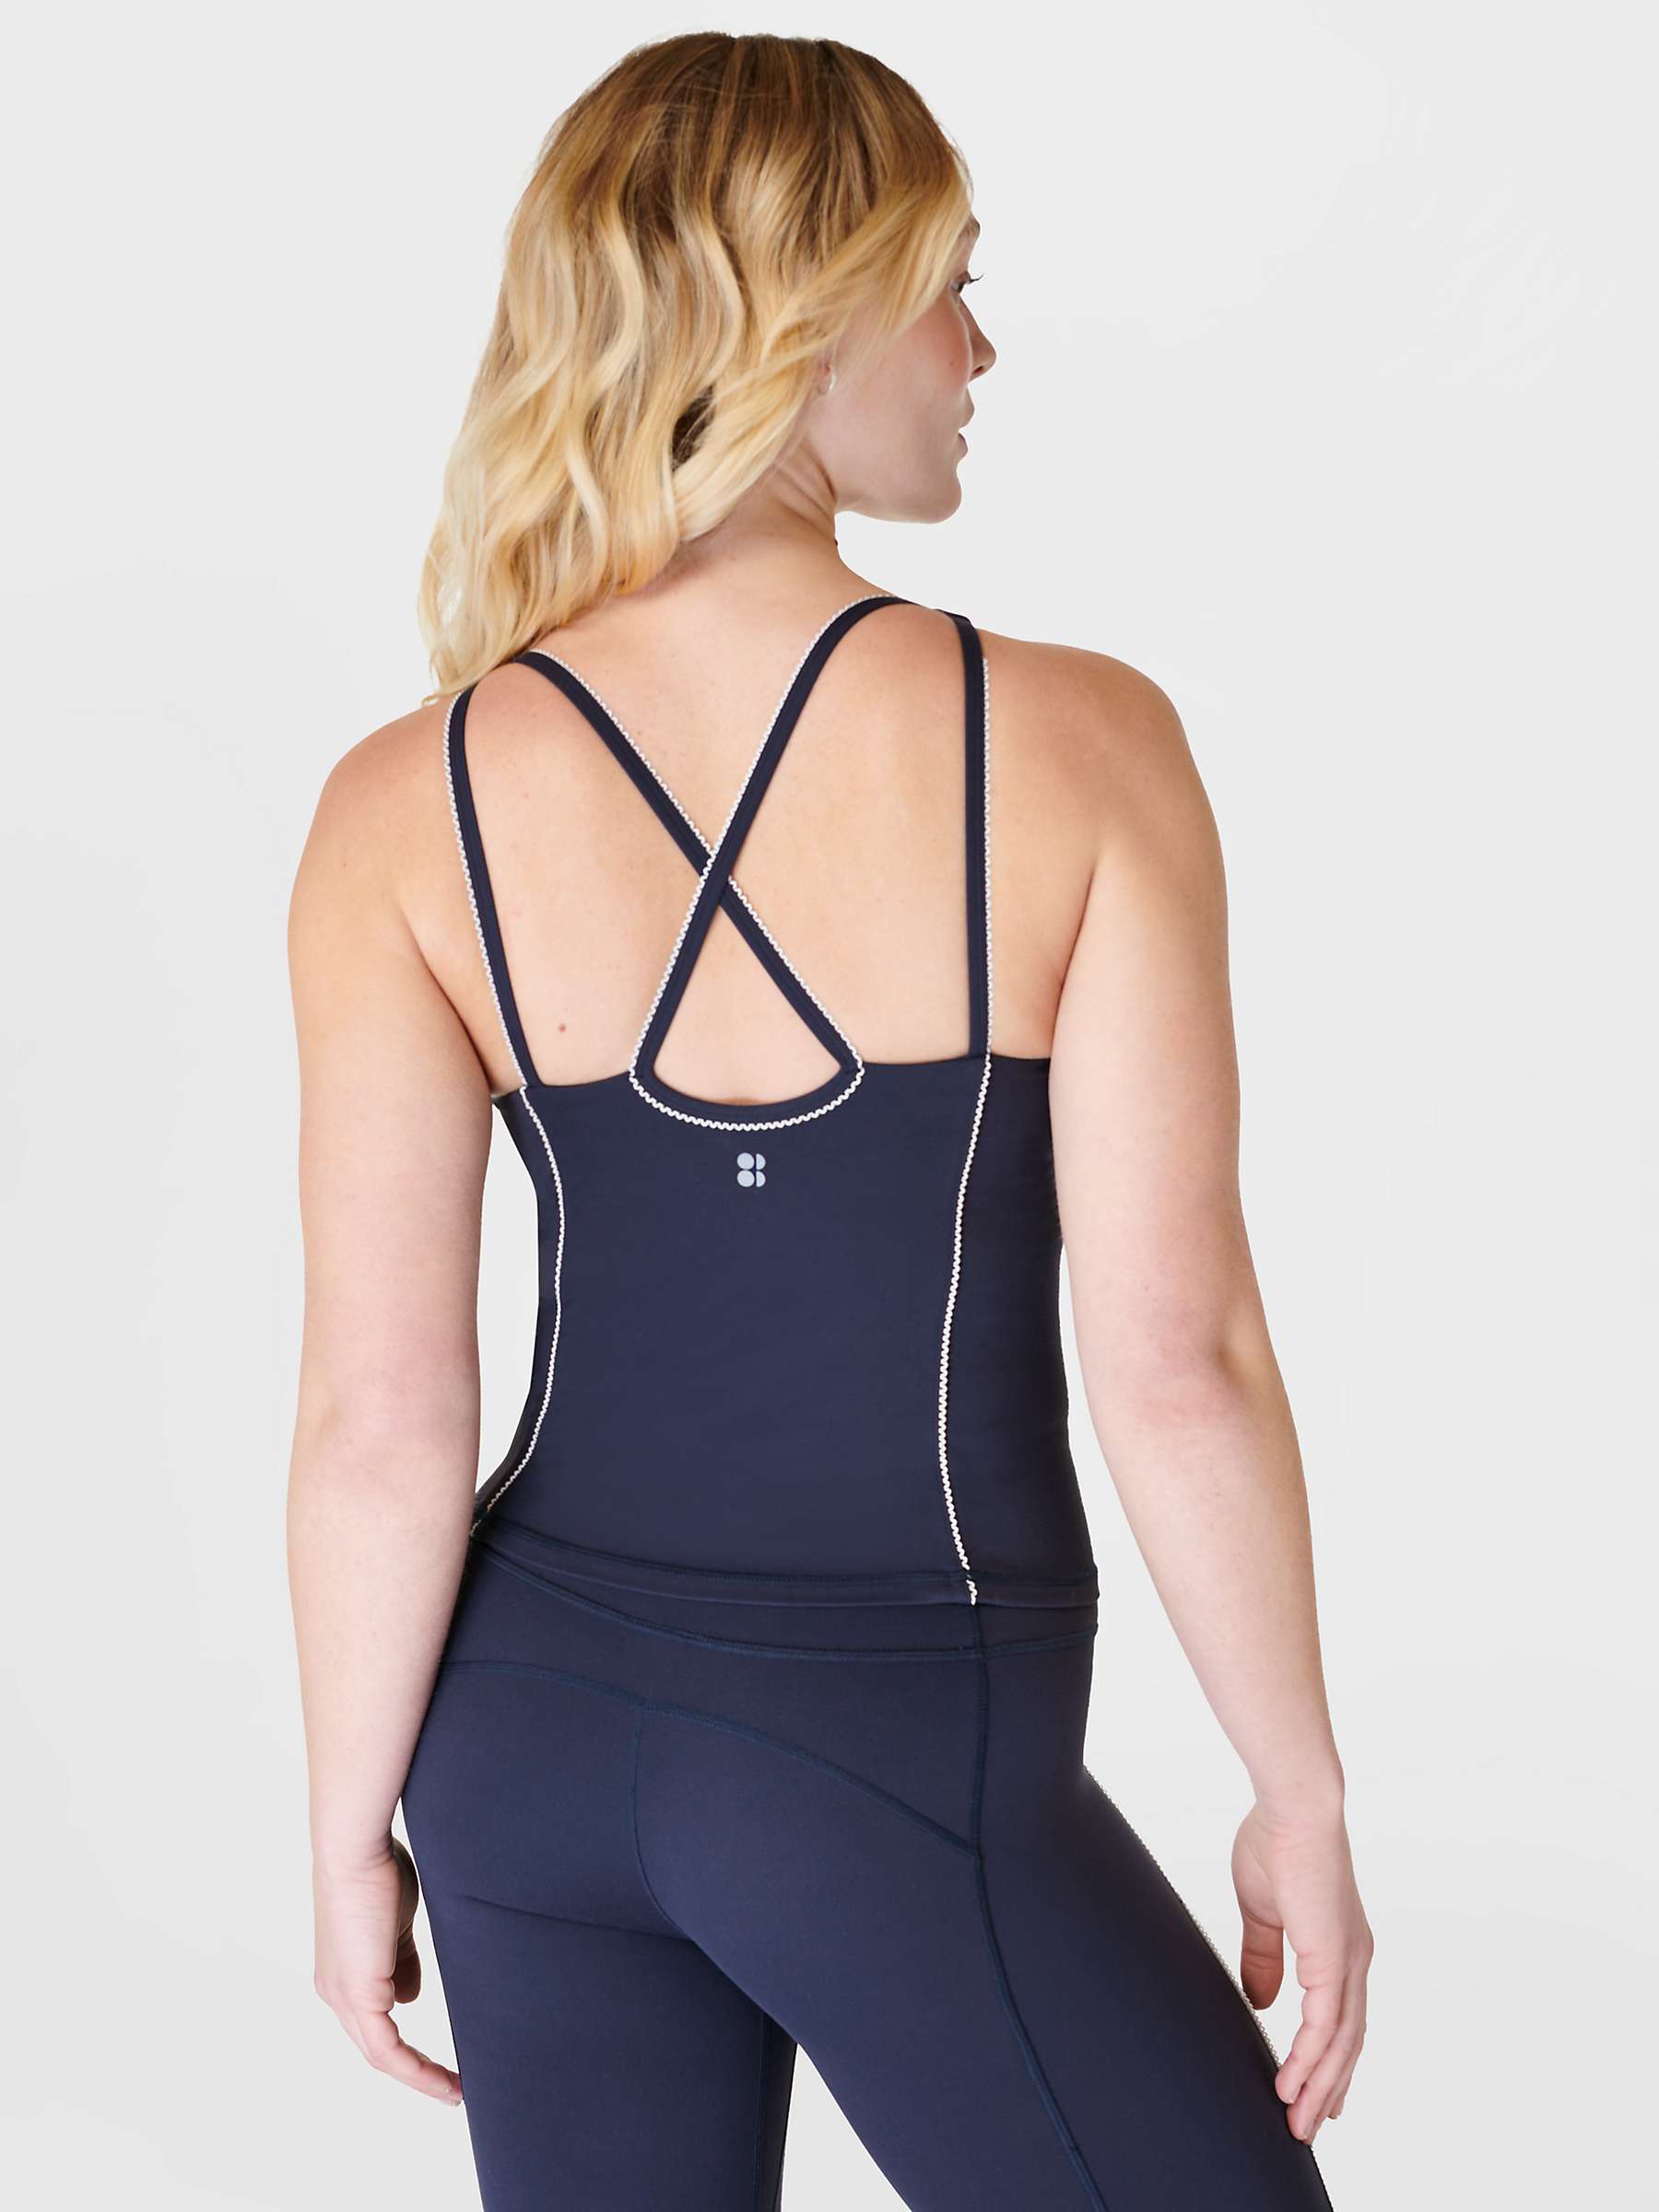 Buy Sweaty Betty Super Soft Picot Lace Strappy Bra Tank, Navy Blue Online at johnlewis.com